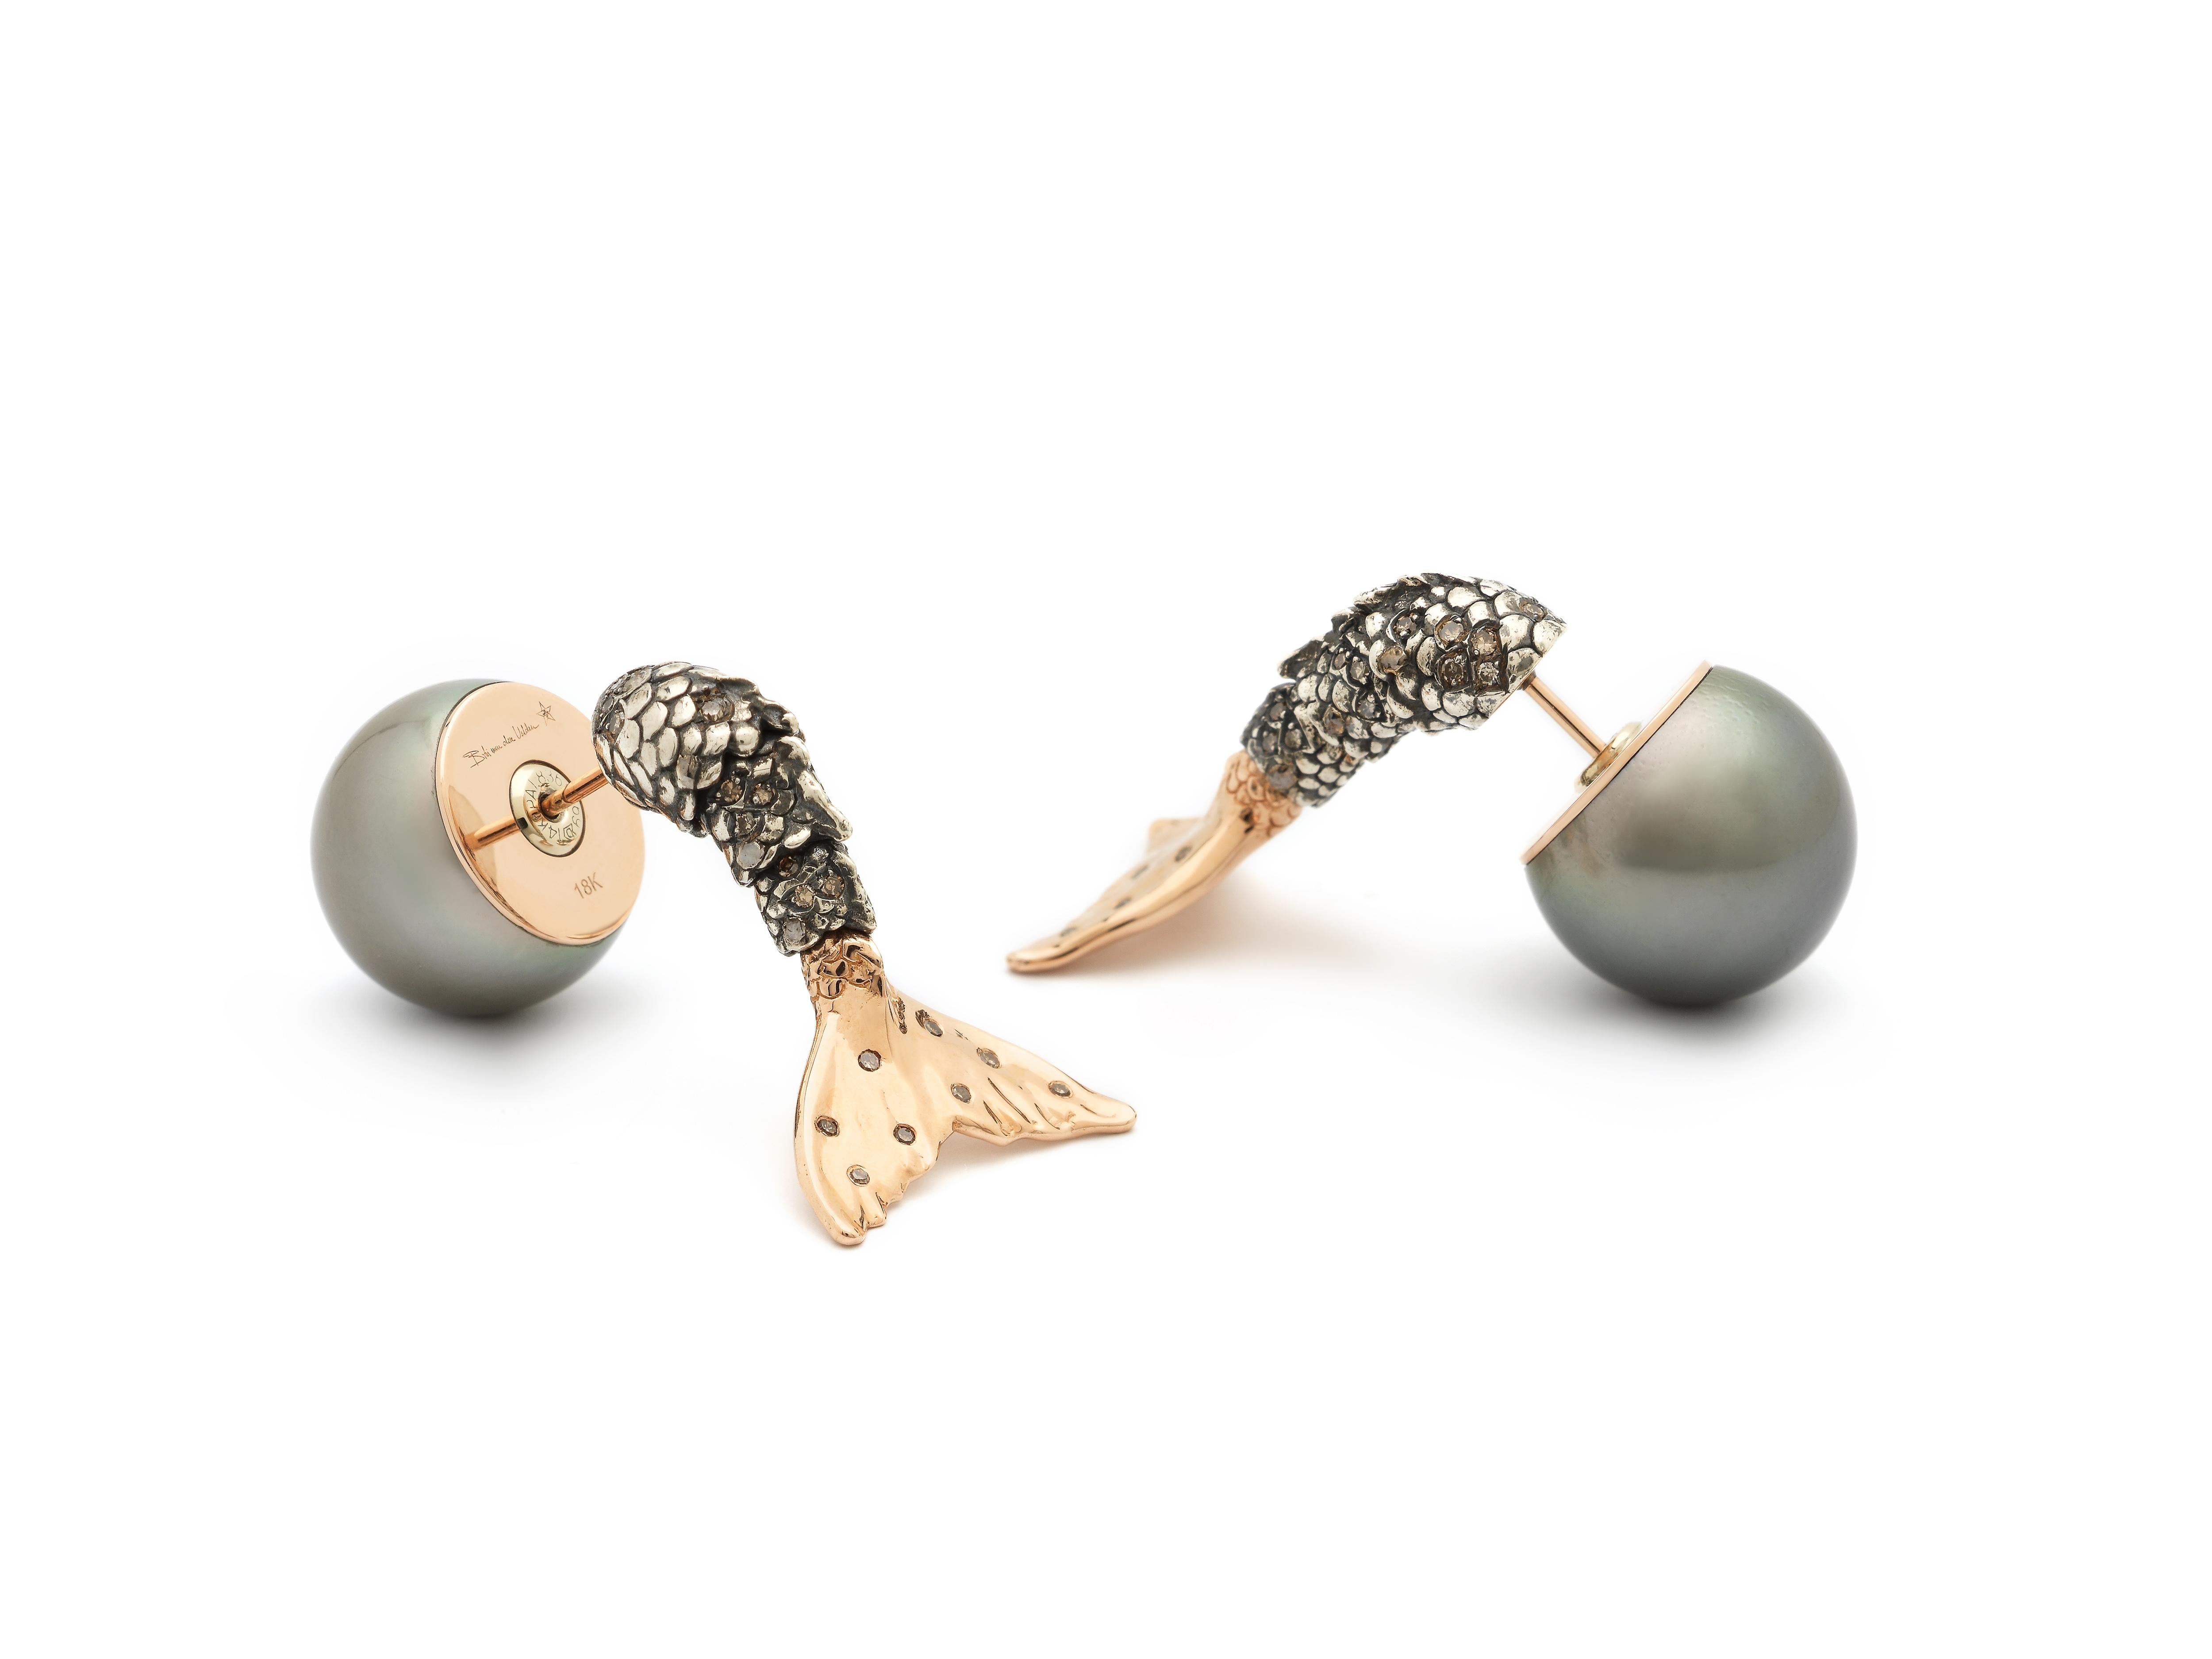 These Mermaid Pearl Earrings spotlight a moving mermaid’s tail, complete with tactile, moving scales and a gold fin. Designed in 18k rose gold and sterling silver, the earrings are embellished with brown diamonds, and deep blue pearl backs.